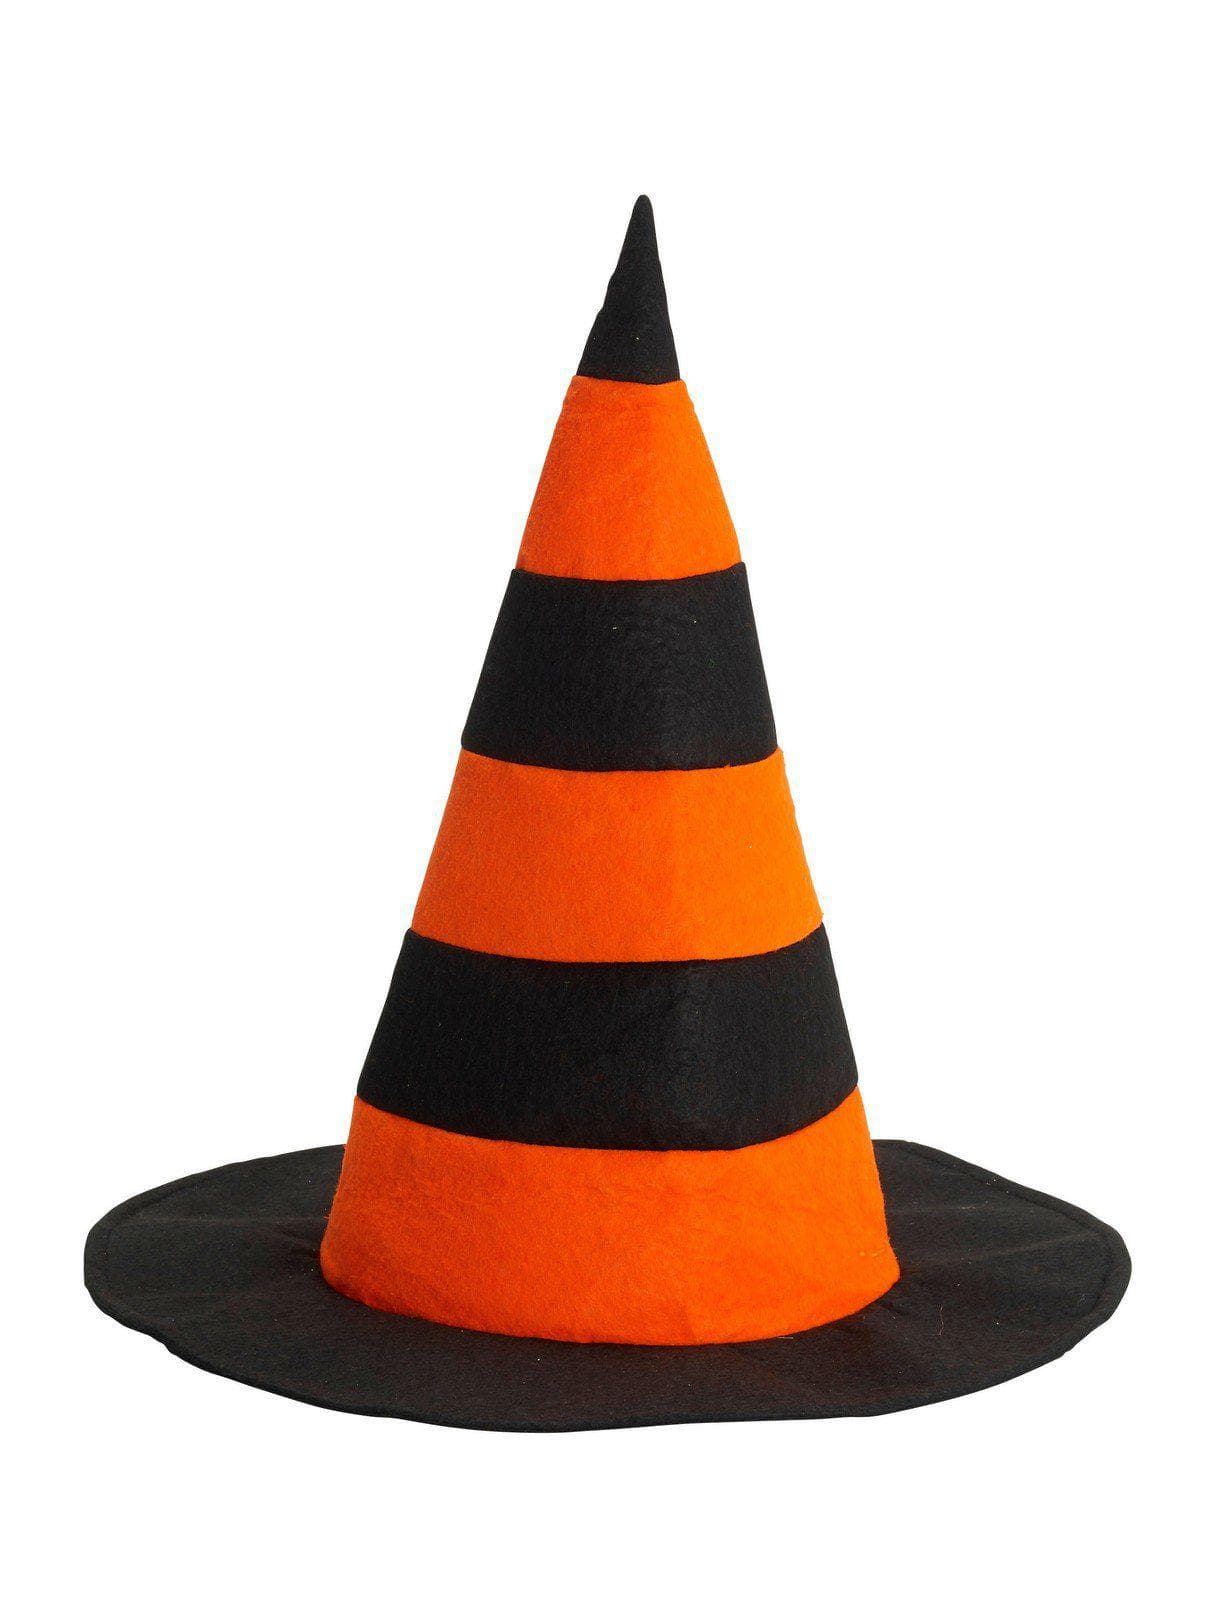 Striped Witch Hat Orange And Black - costumes.com